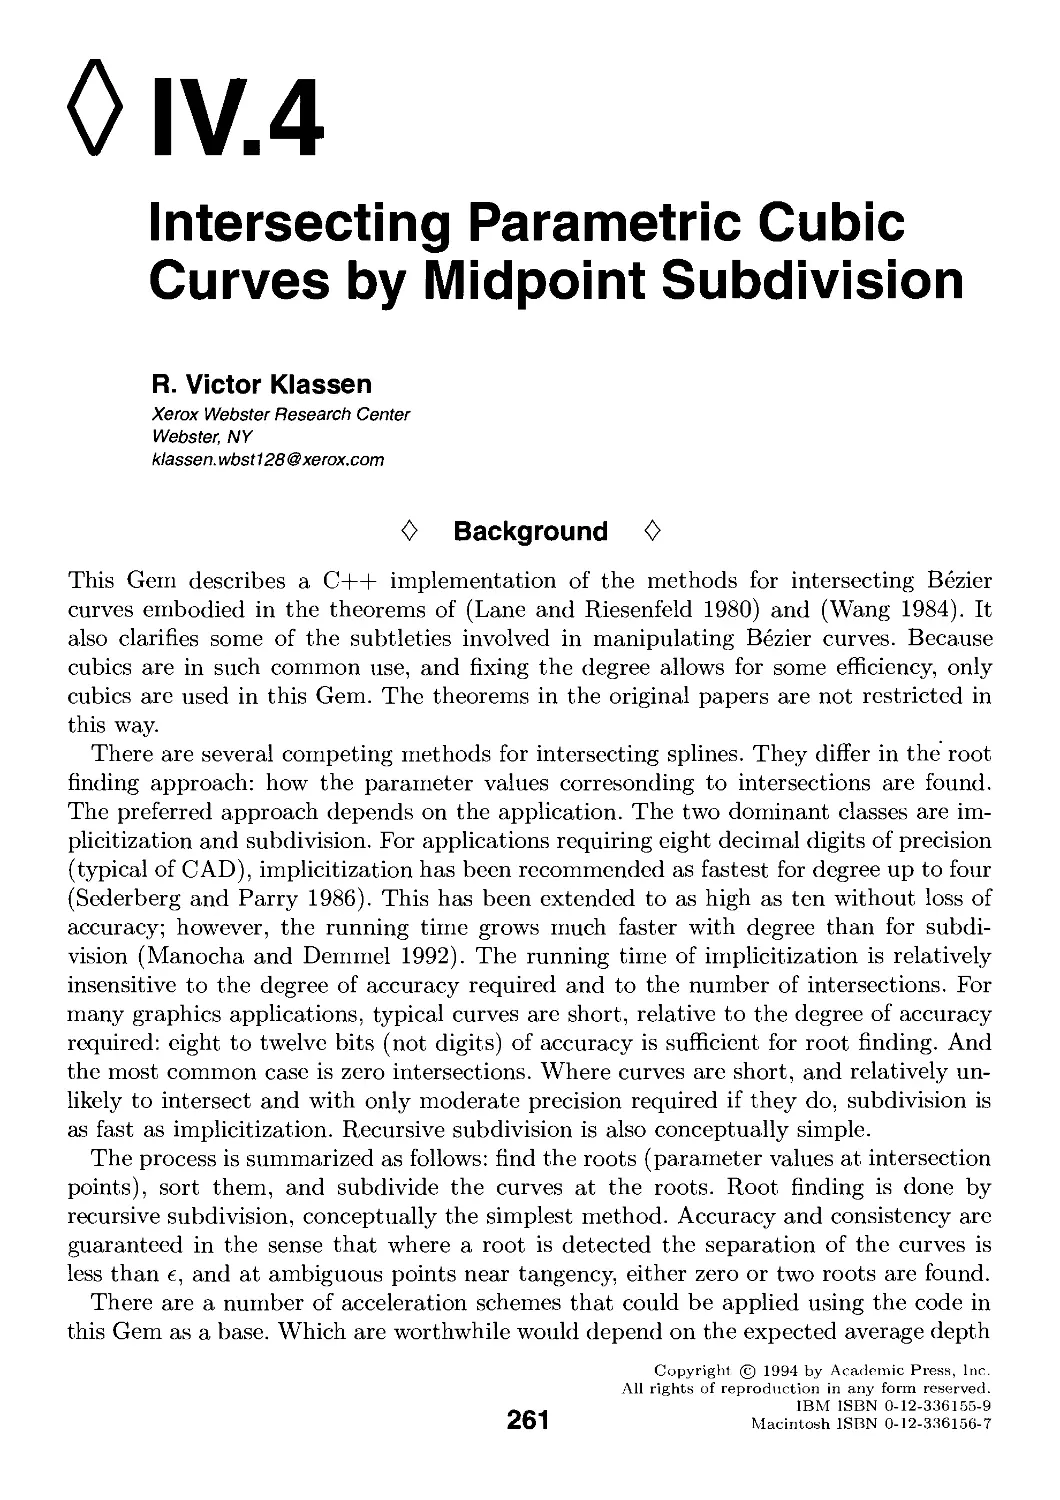 IV.4. Intersecting Parametric Cubic Curves by Midpoint Subdivision by Victor Klassen